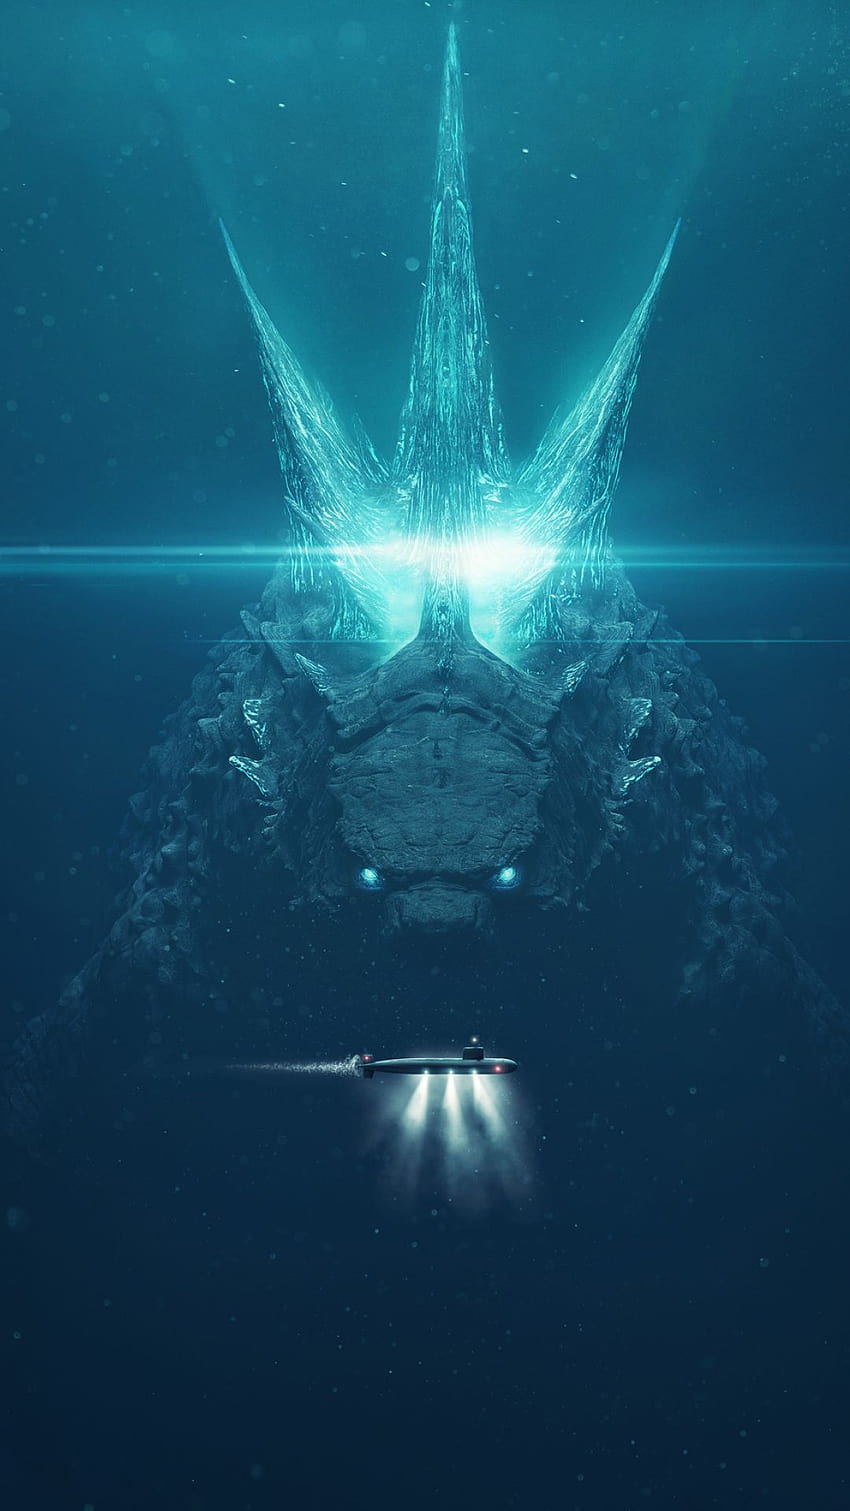 1080x1920 Godzilla King of the Monsters 2019 Poster Iphone 7, 6s, 6 Plus and Pixel XL ,One Plus 3, 3t, 5 , Movies , and …, godzilla king of the monsters iphone HD phone wallpaper